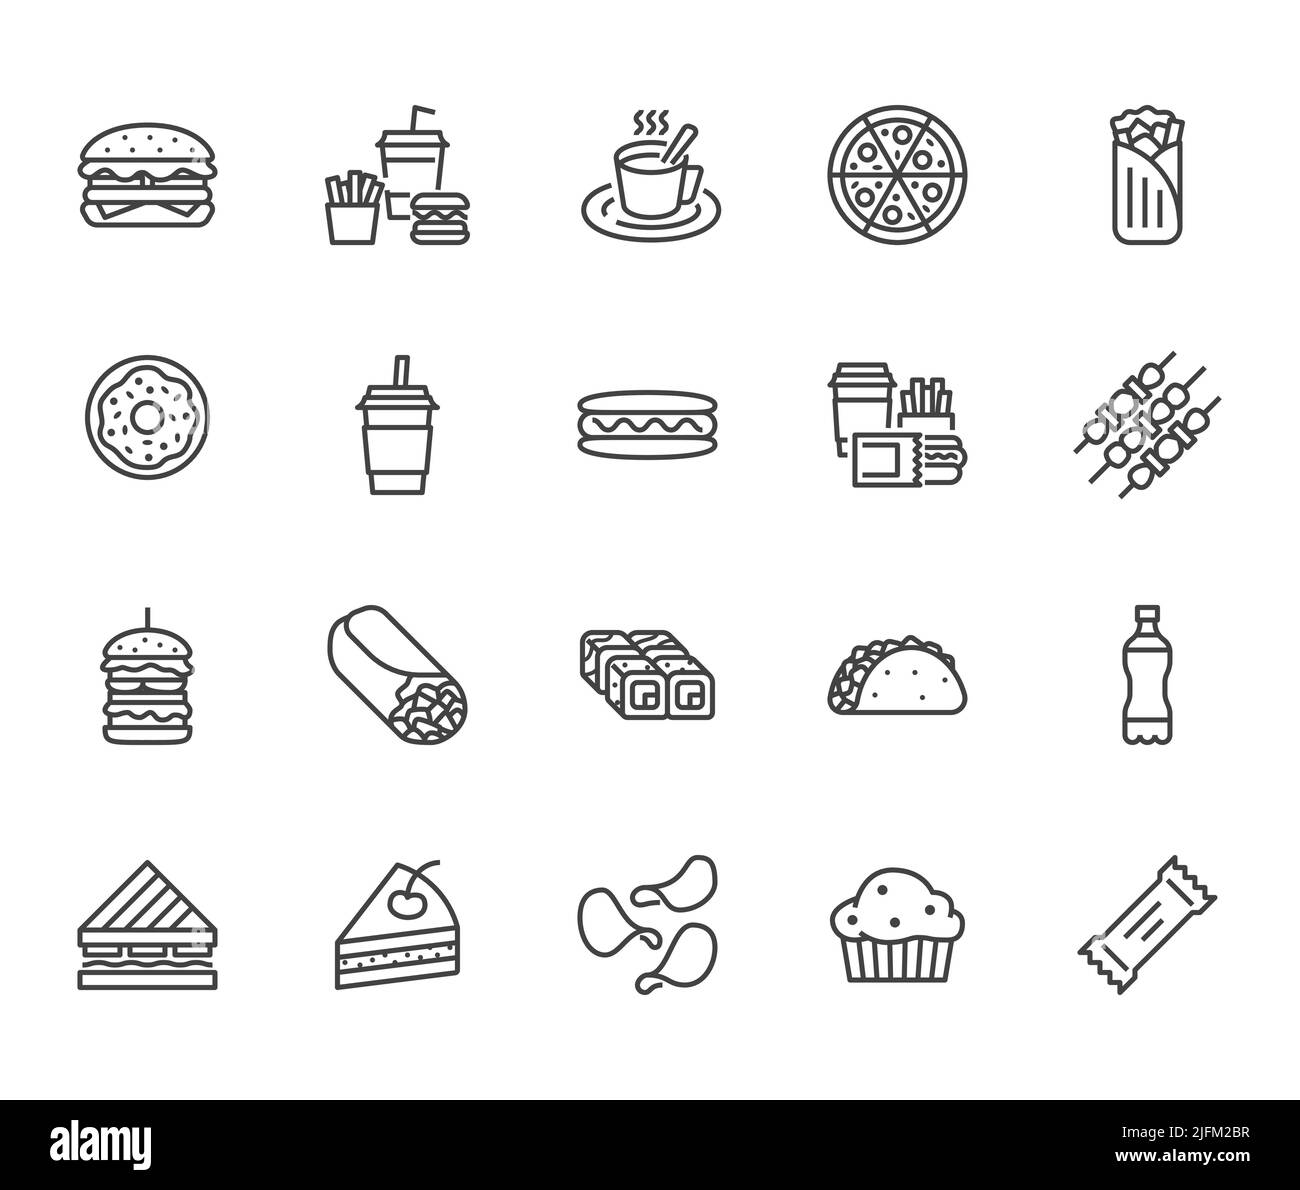 Junk food flat line icons set. Burger, fast snacks, sandwich, french fries, hot dog, mexican burrito, pizza vector illustrations. Thin signs for Stock Vector